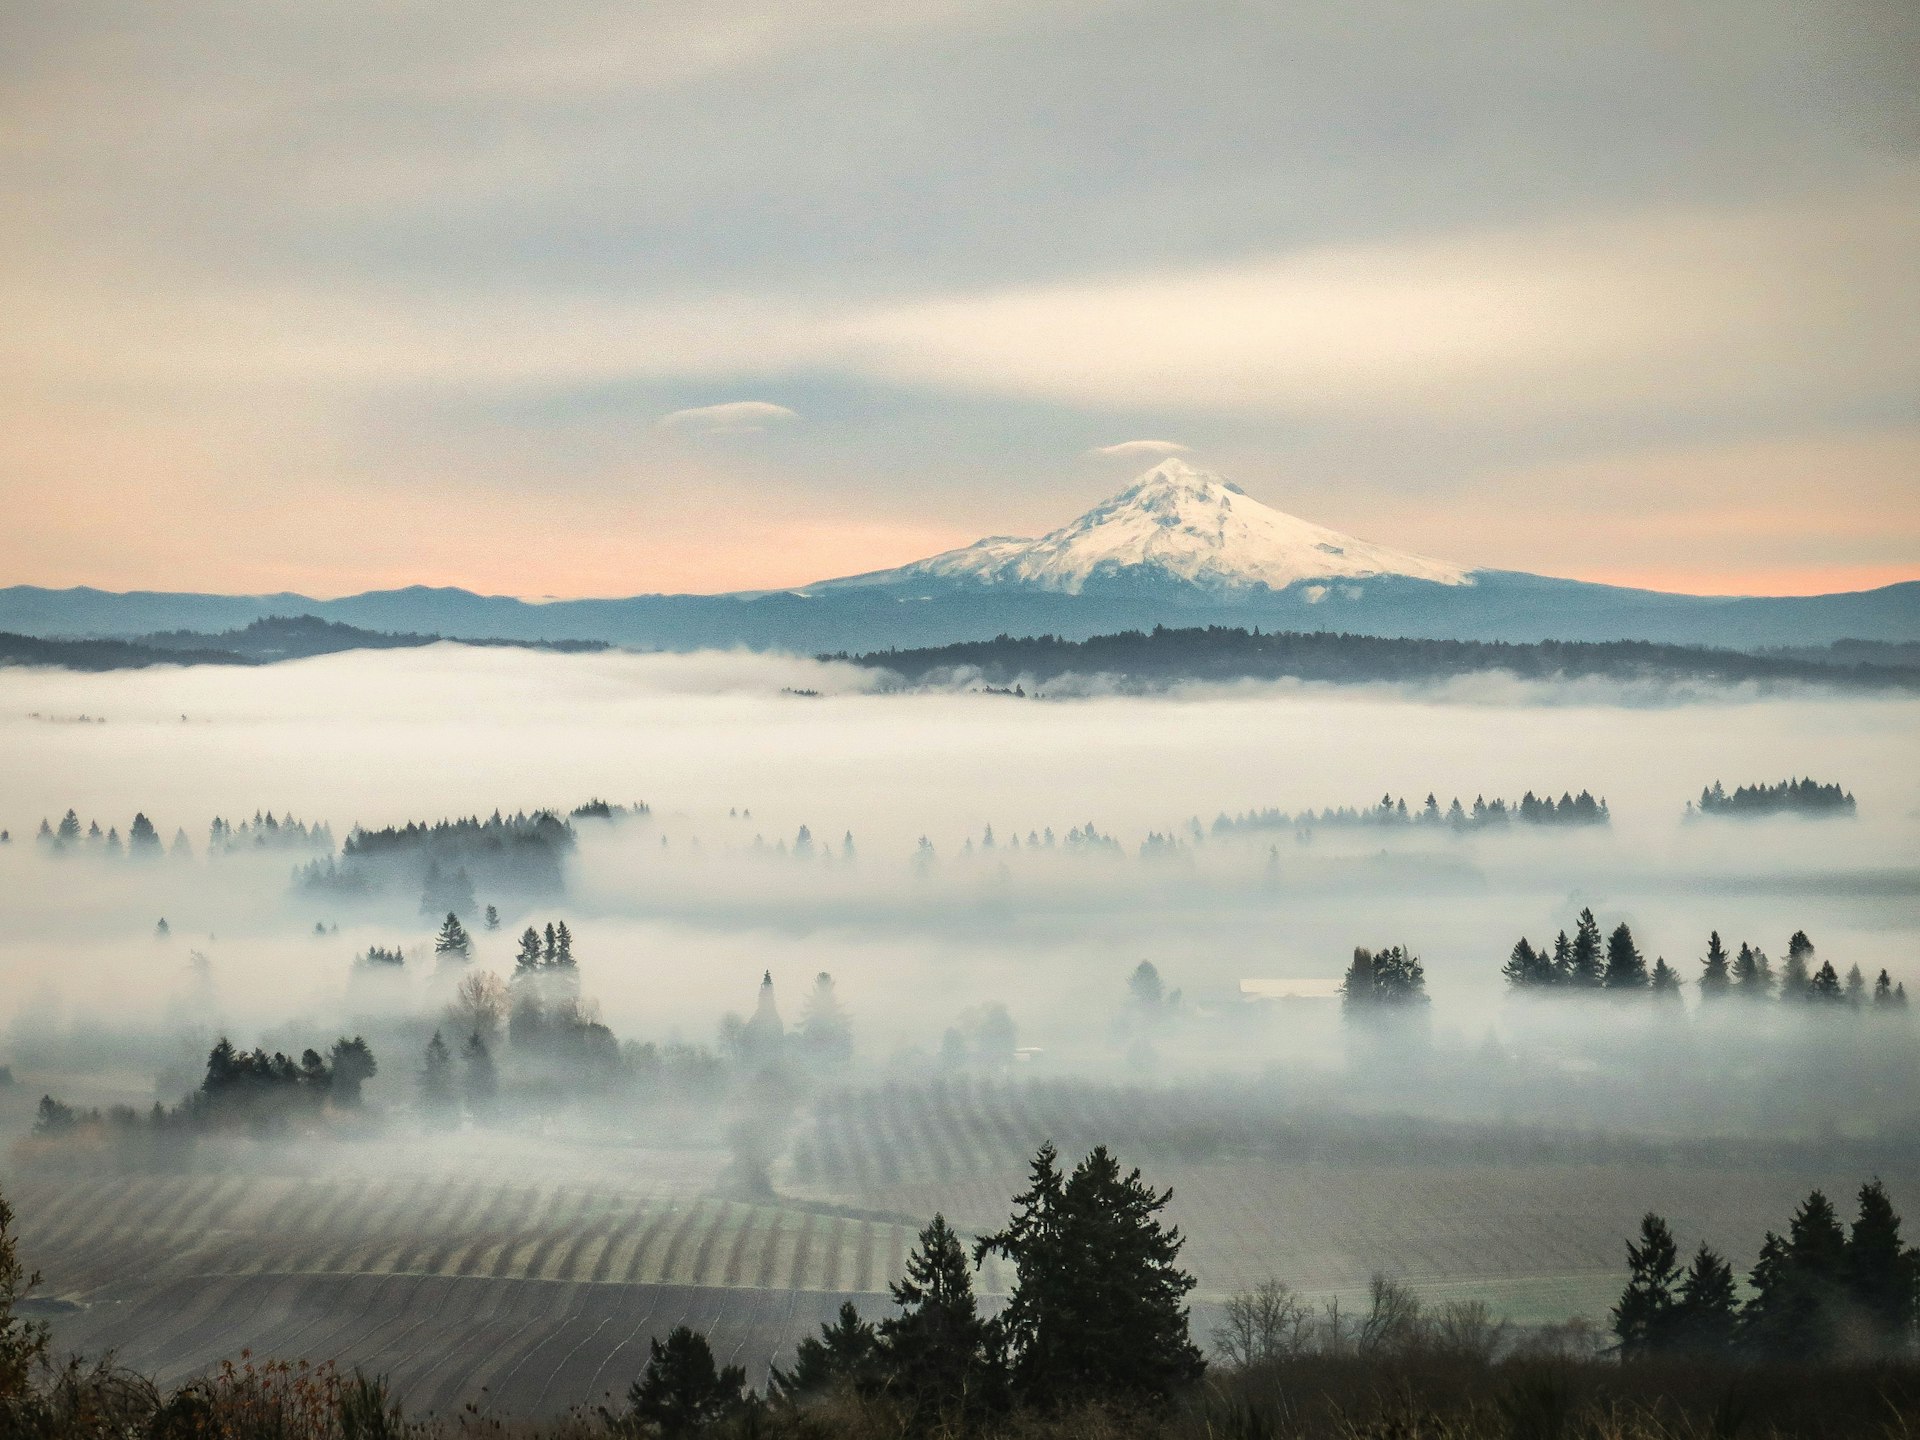 A snow-capped mountain rises above a misty vineyard